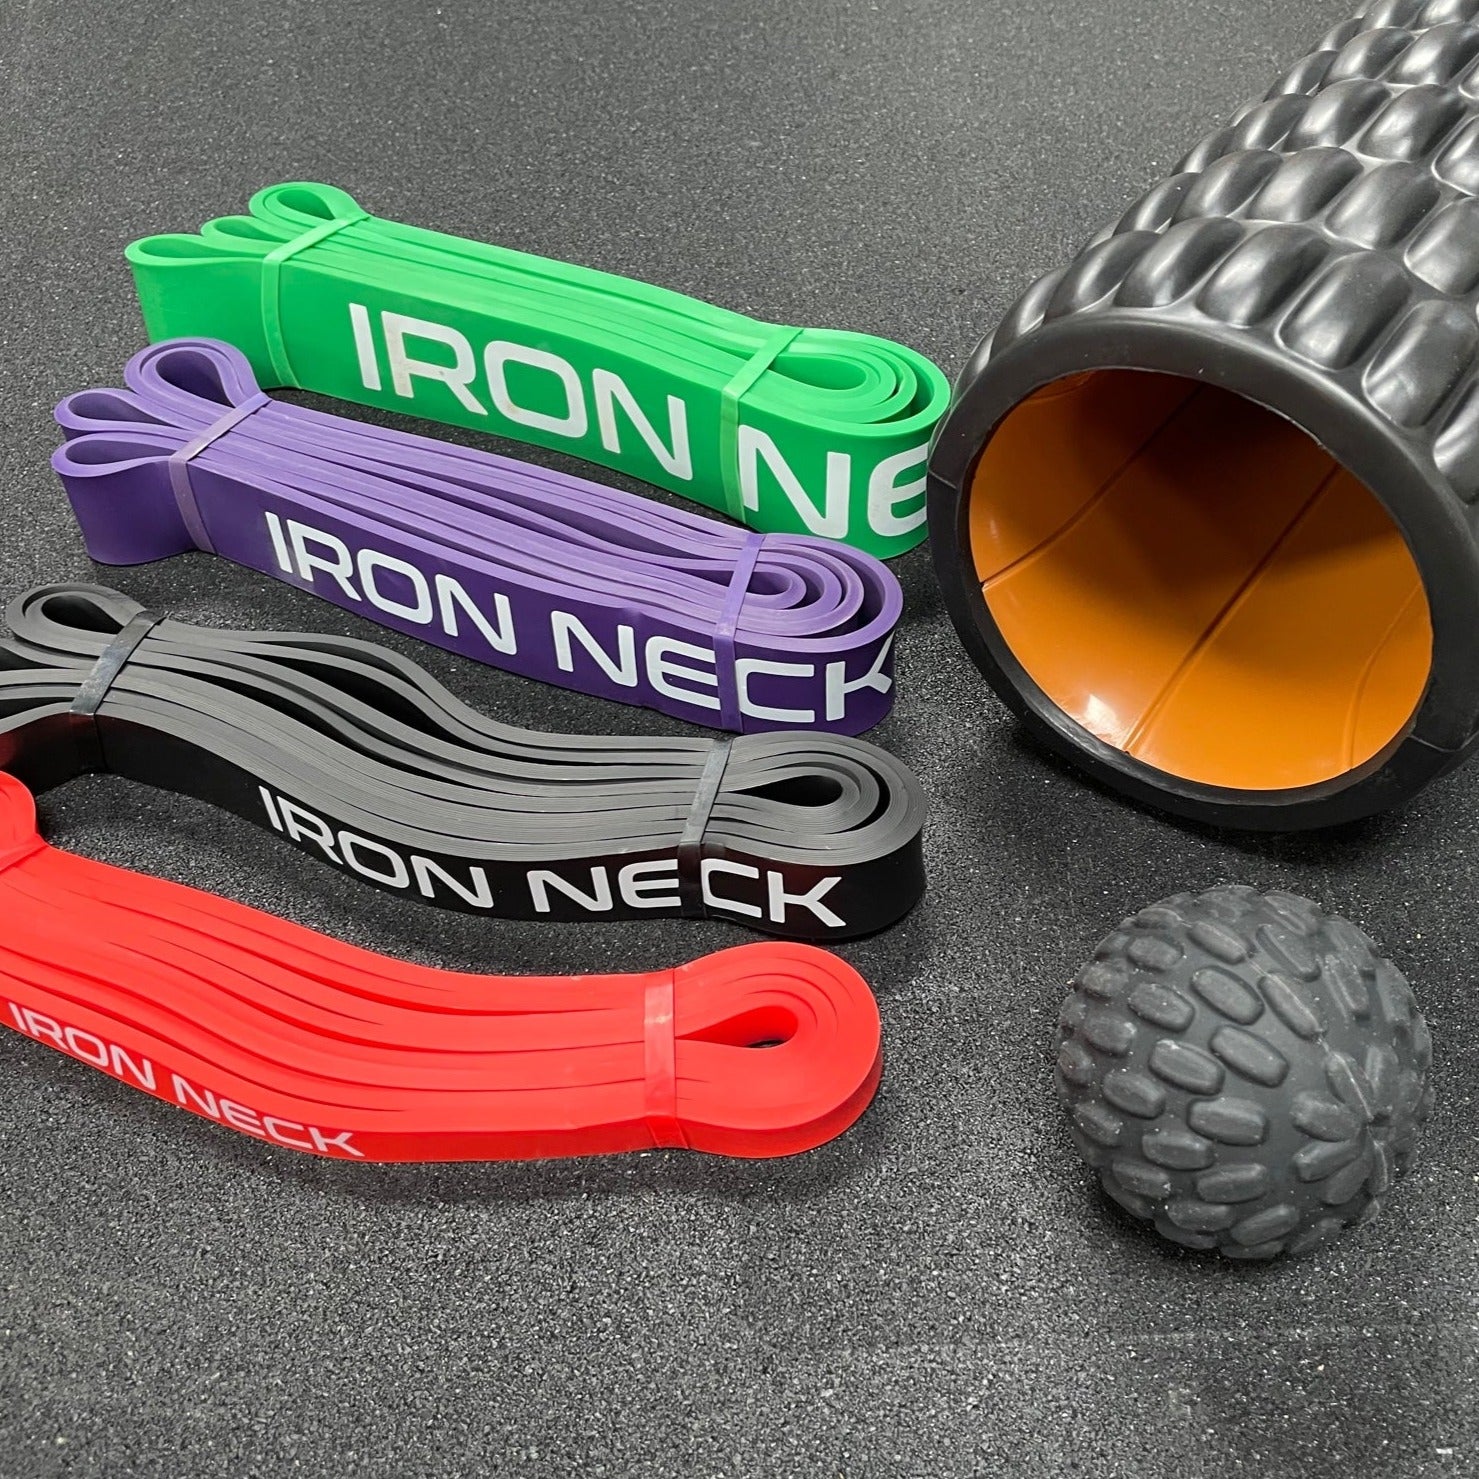 Foam Roller, Trigger Point Ball and Resistance bands